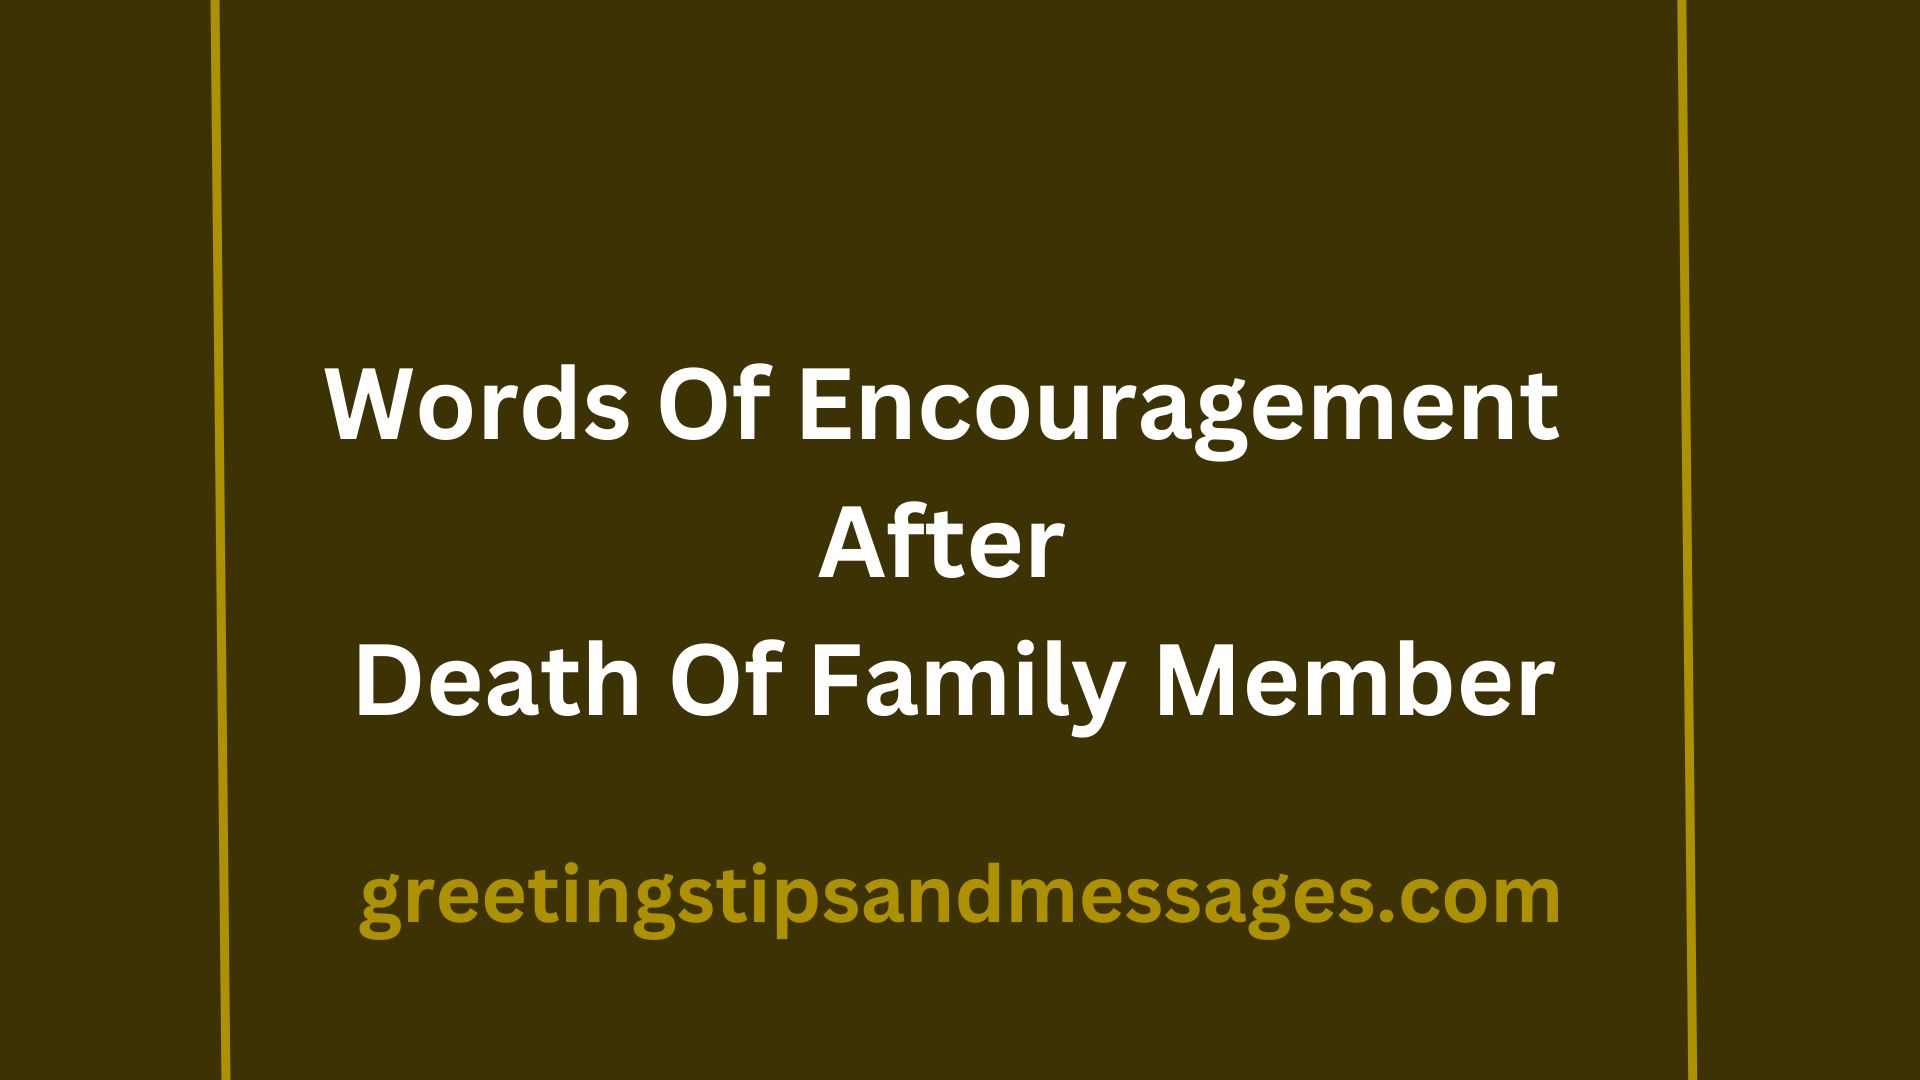 Words Of Encouragement After Death Of Family Member